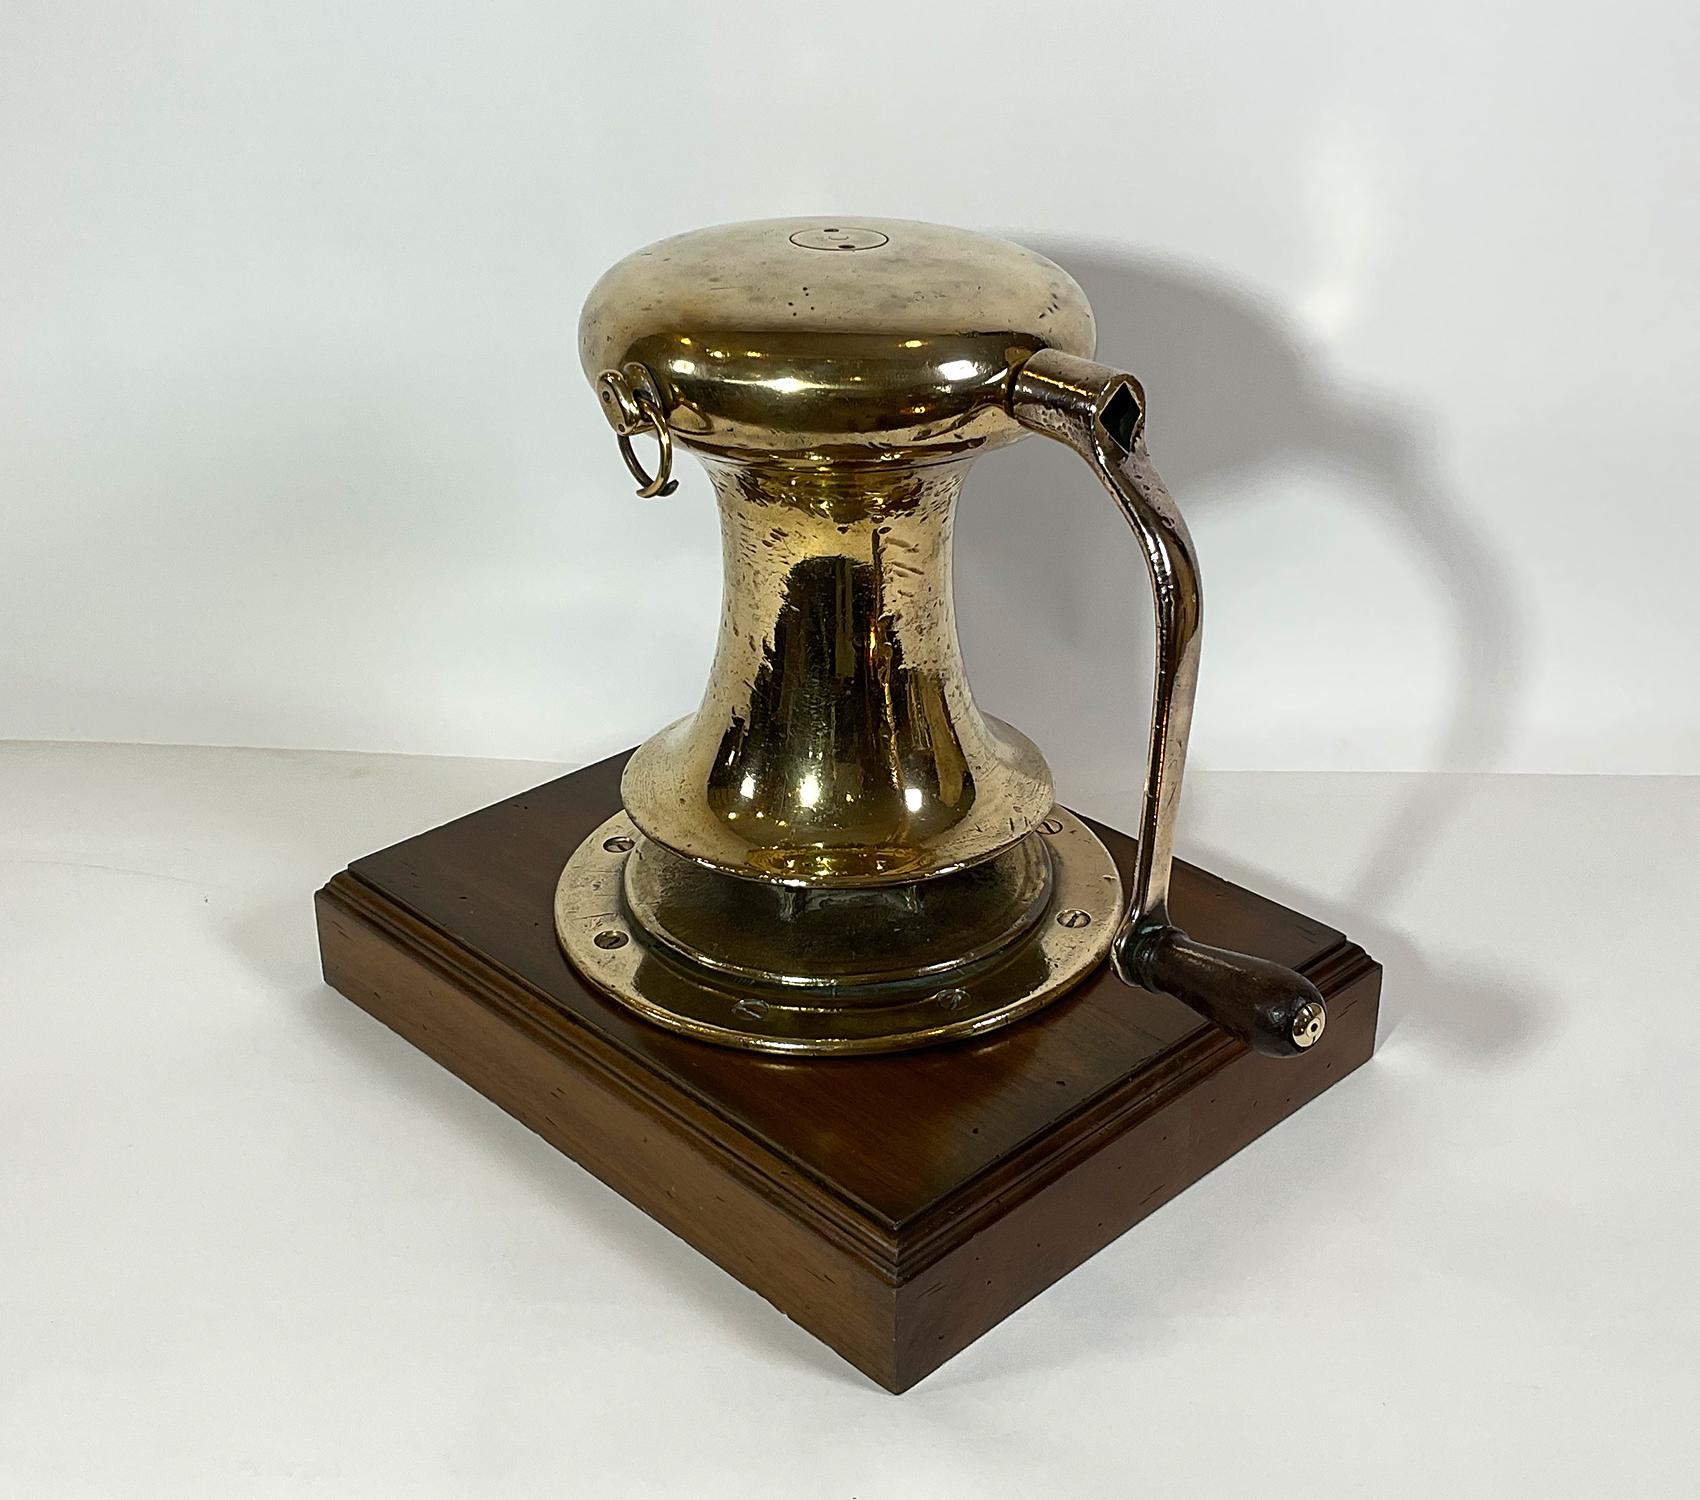 Polished Brass Yacht Capstan by Hereshoff In Good Condition For Sale In Norwell, MA